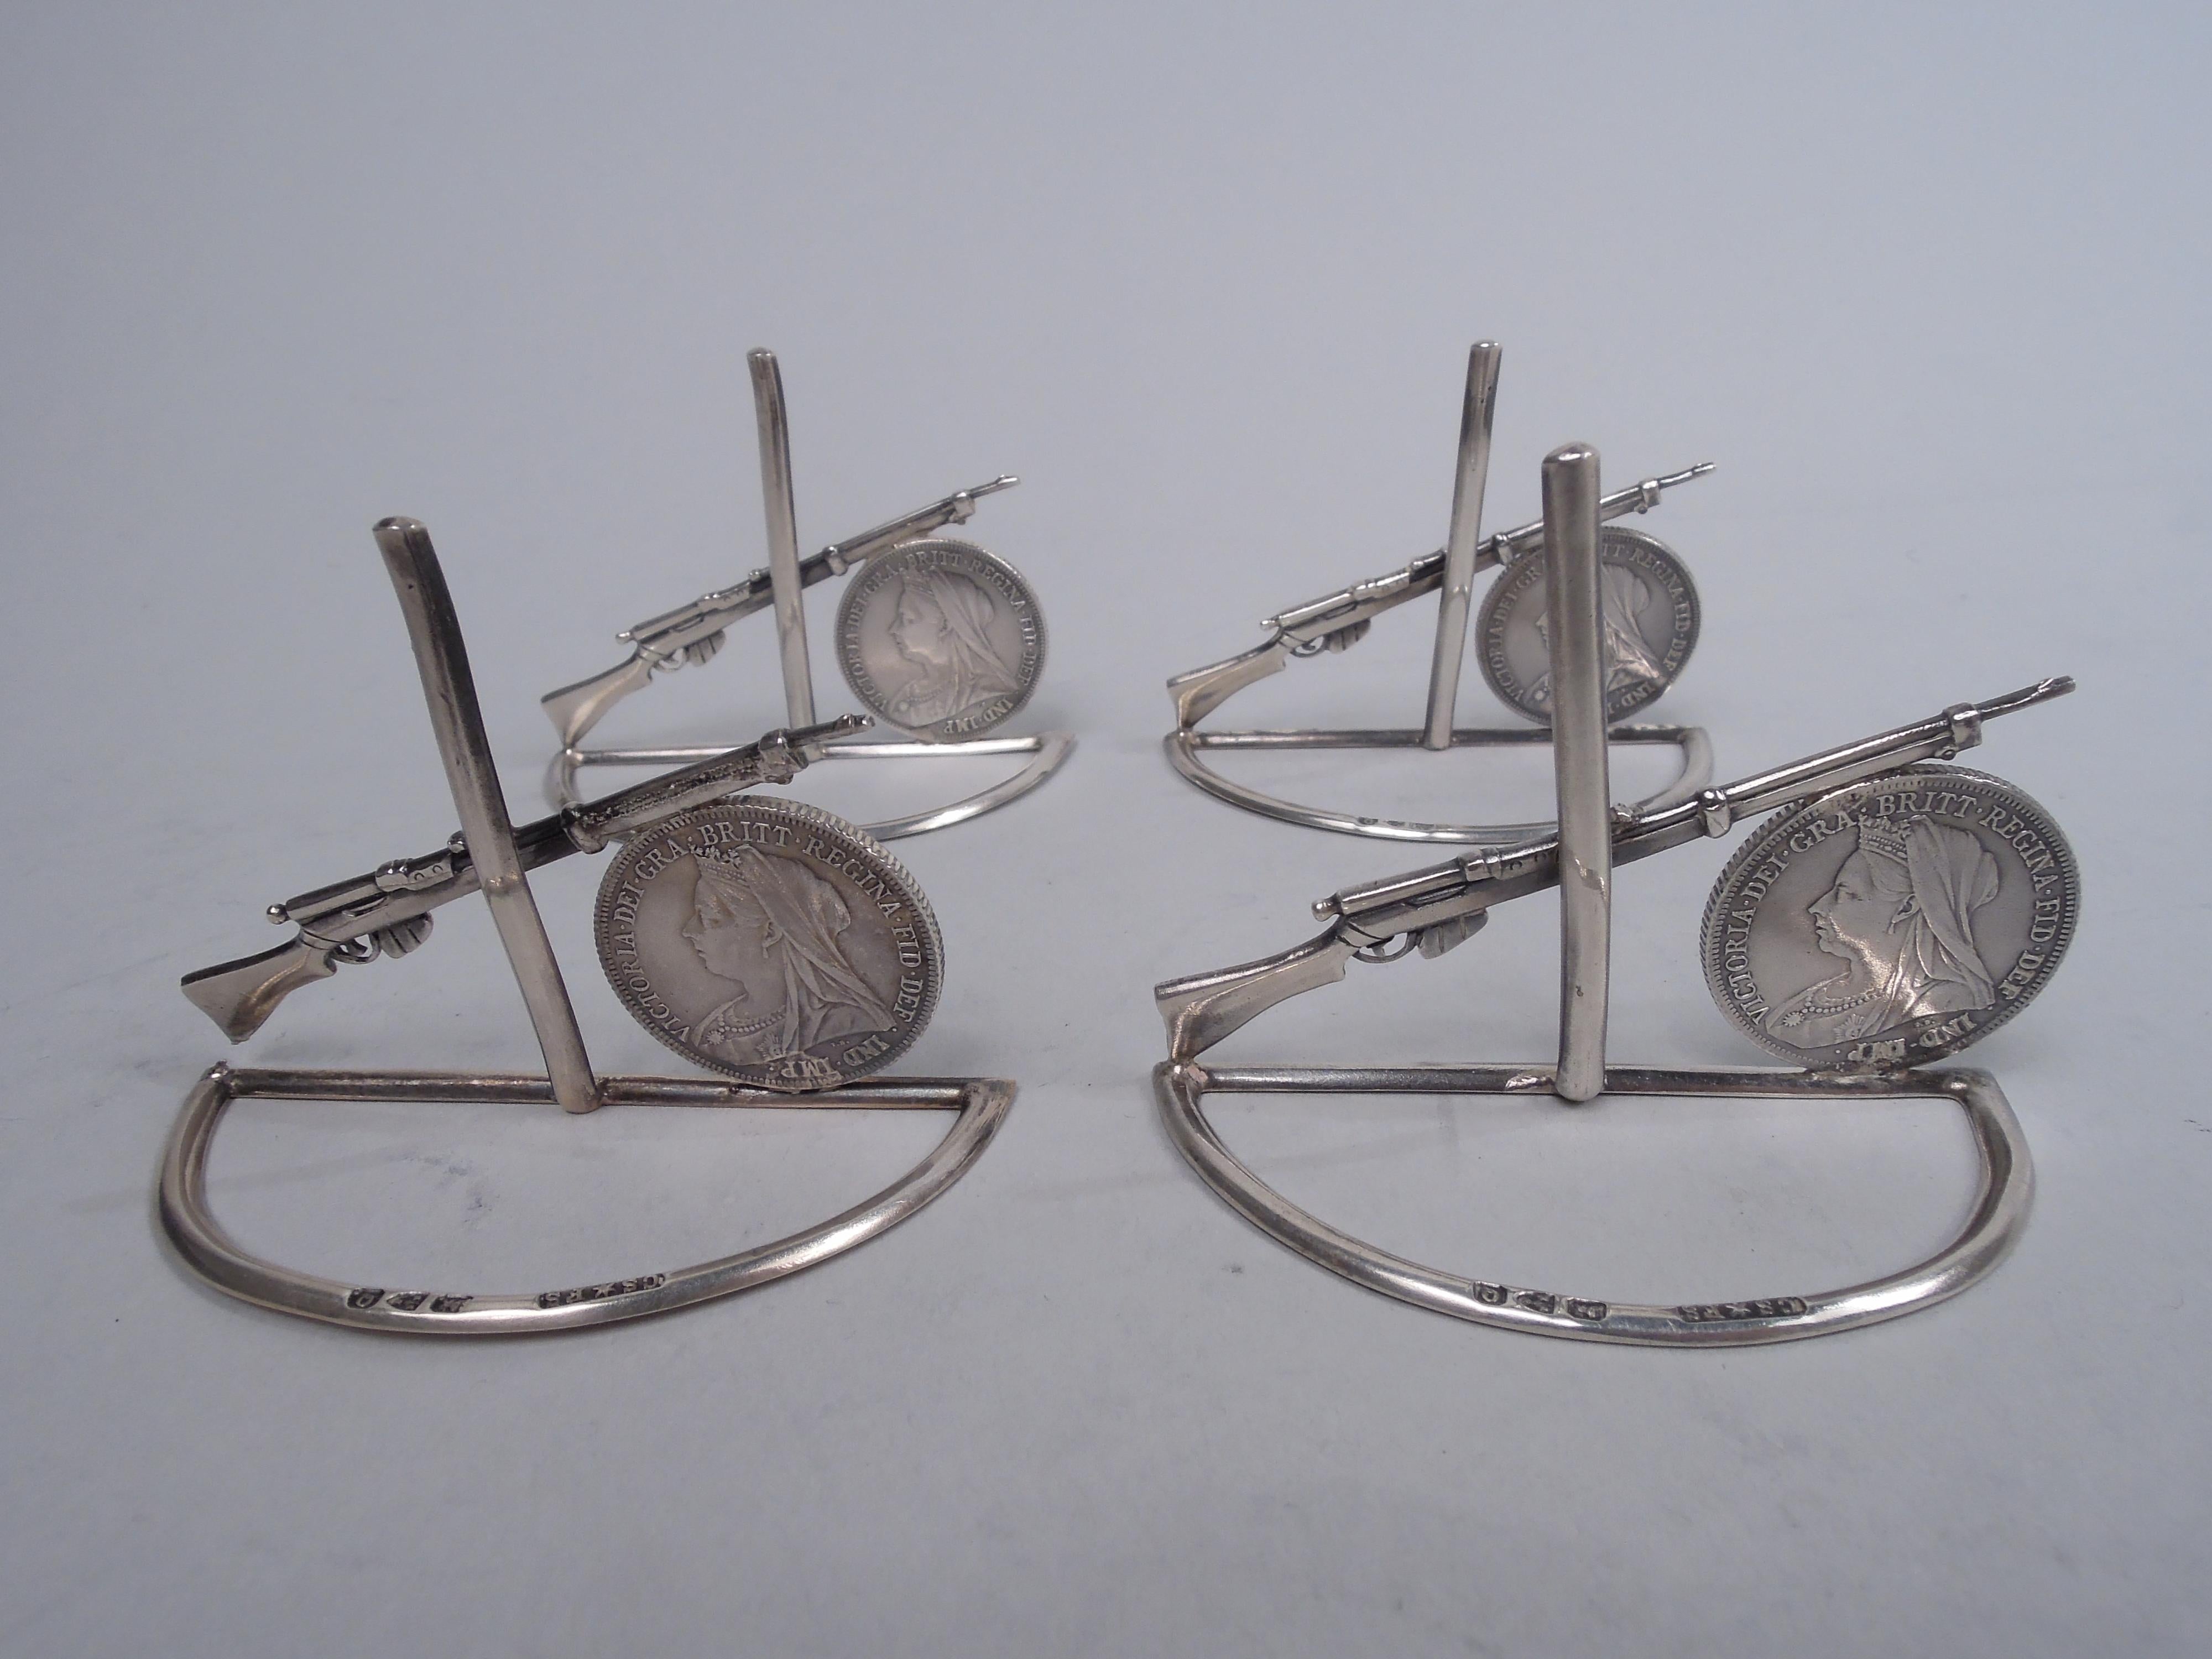 Set of 4 Victorian sterling silver place card holders. Made by Saunders and Shepherd in Chester in 1899. Each: A rifle is propped against a shilling coin dated 1899, the year war broke out in South Africa between the British and Dutch colonial